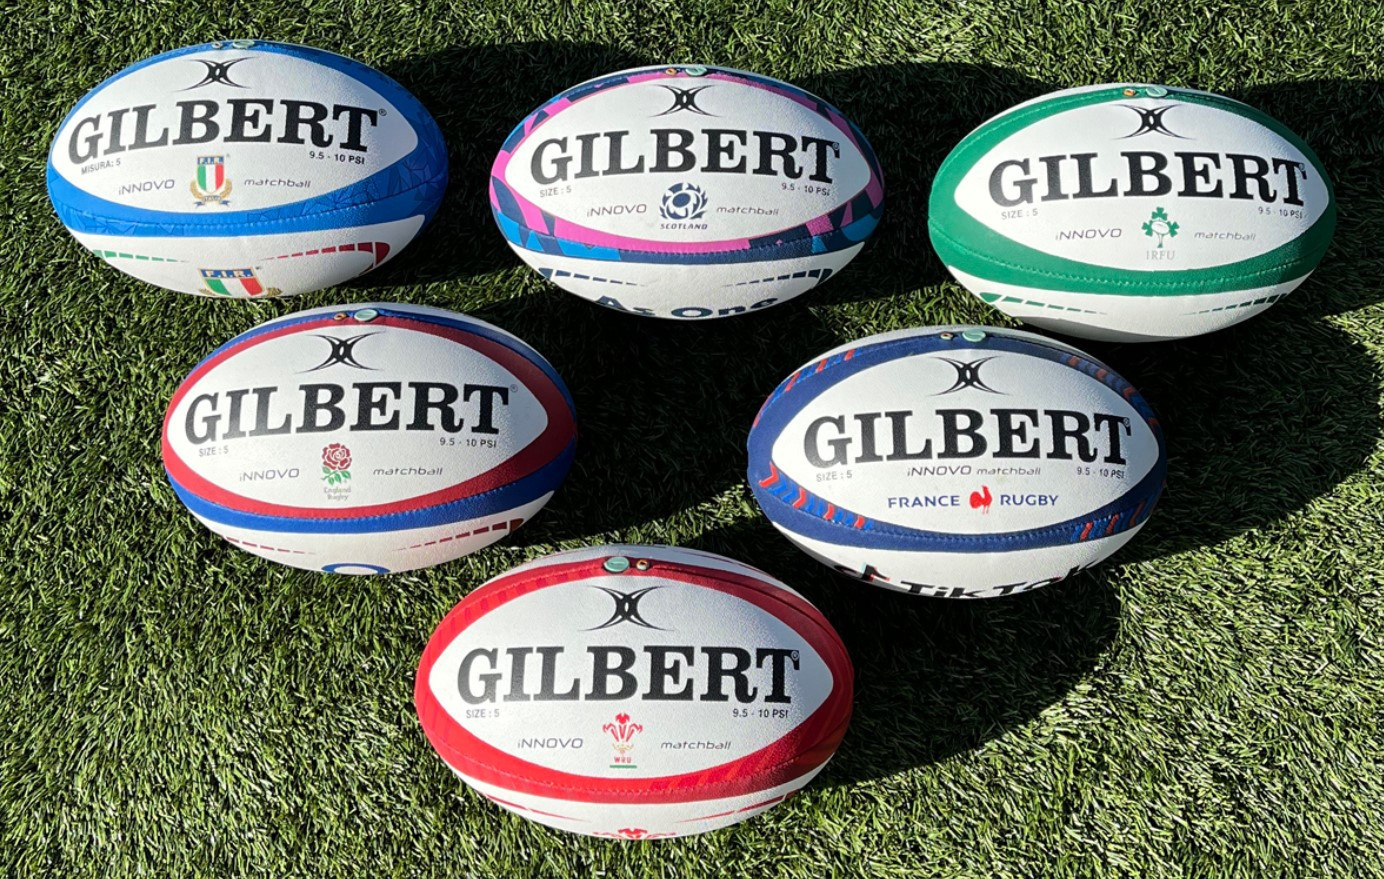 Smart Ball providing live insights and new data at Six Nations tournaments